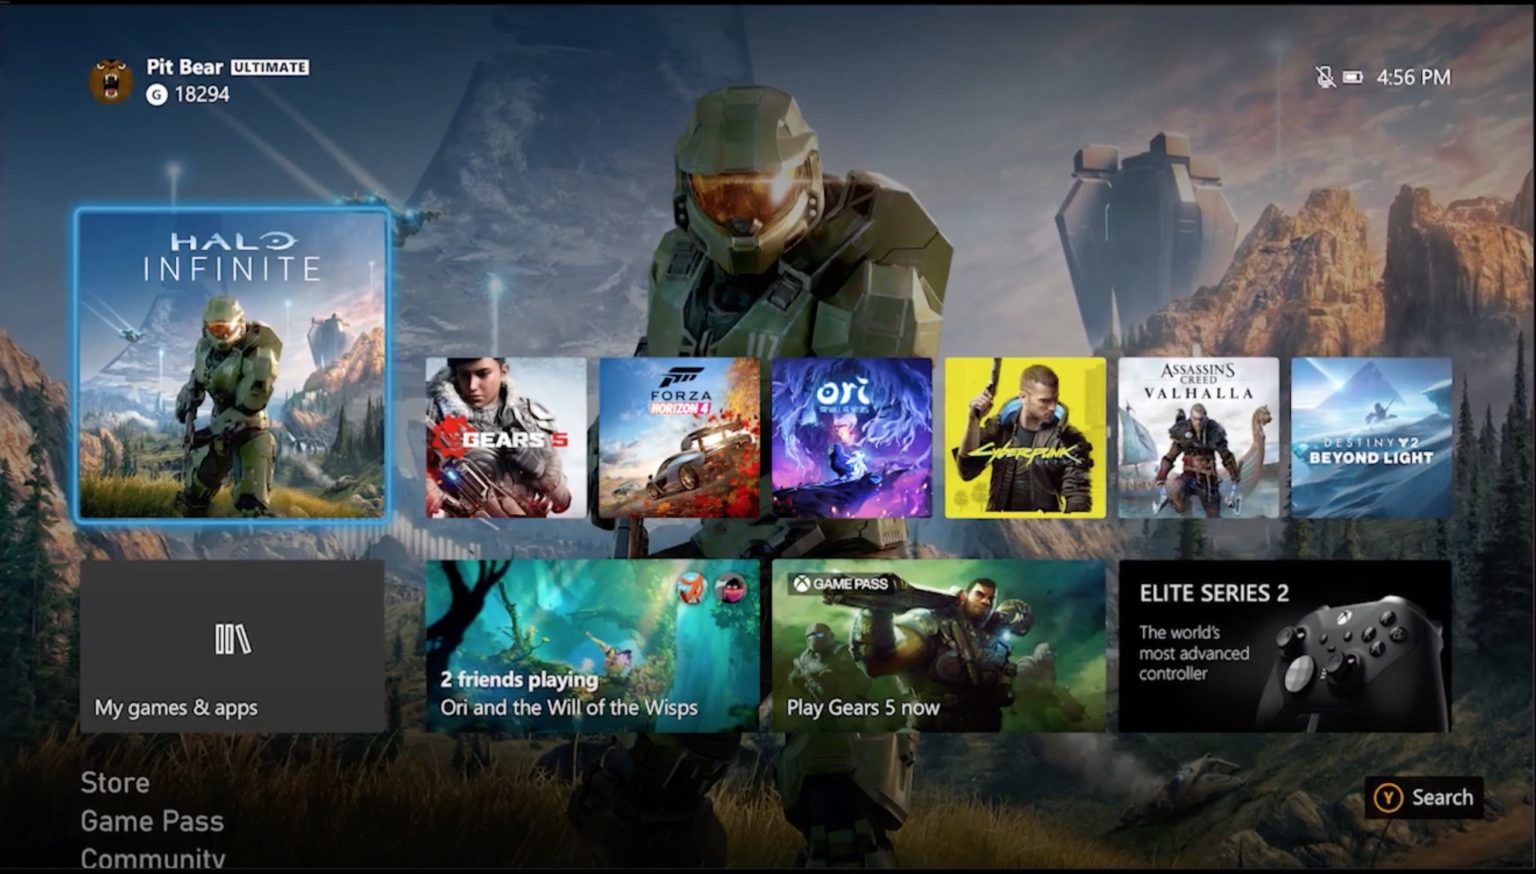 This is the main menu and interface of the Xbox Series X console